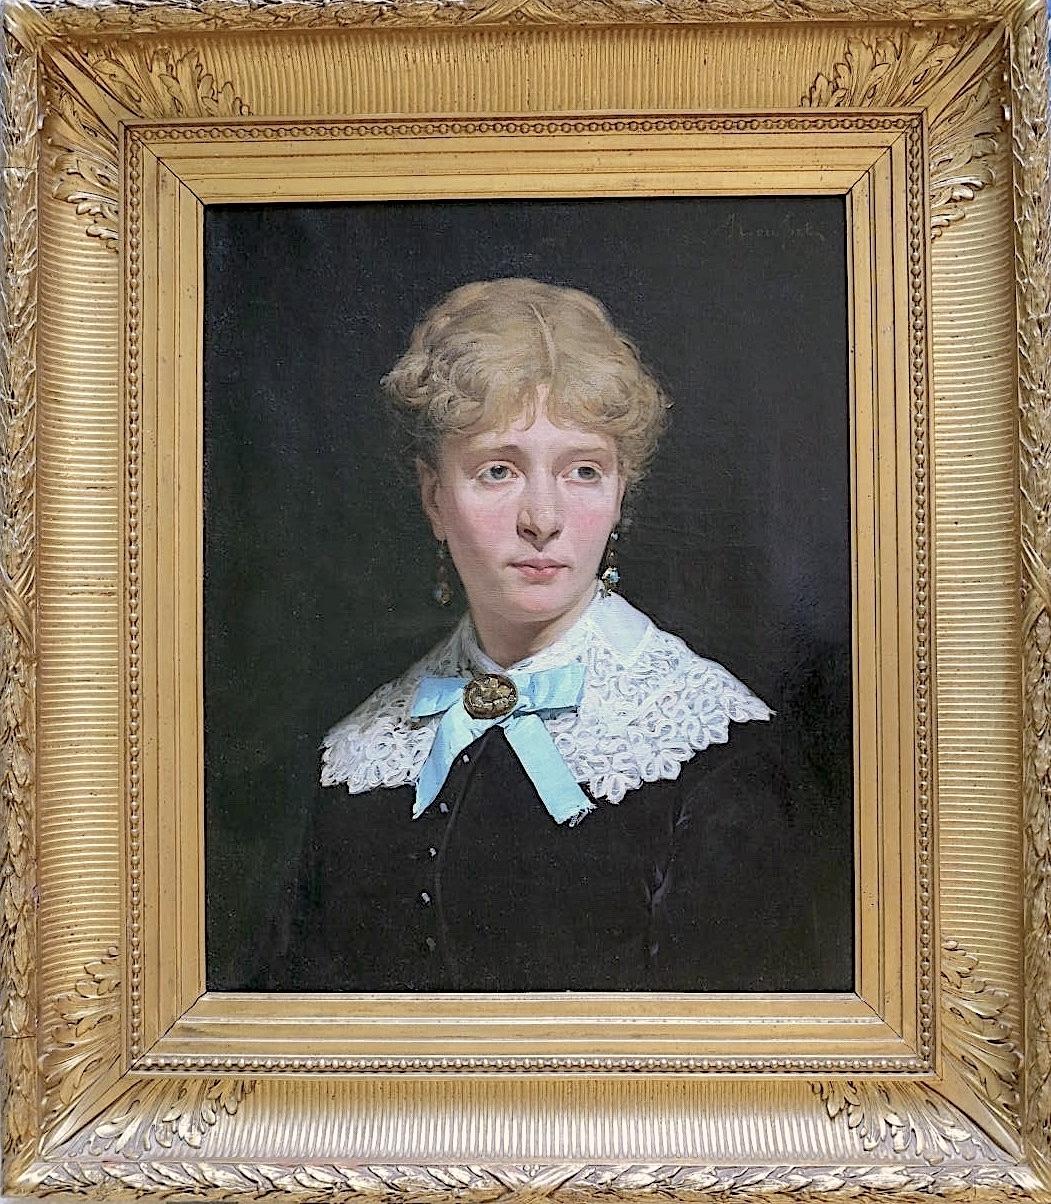 Portrait of a young woman with blond hair